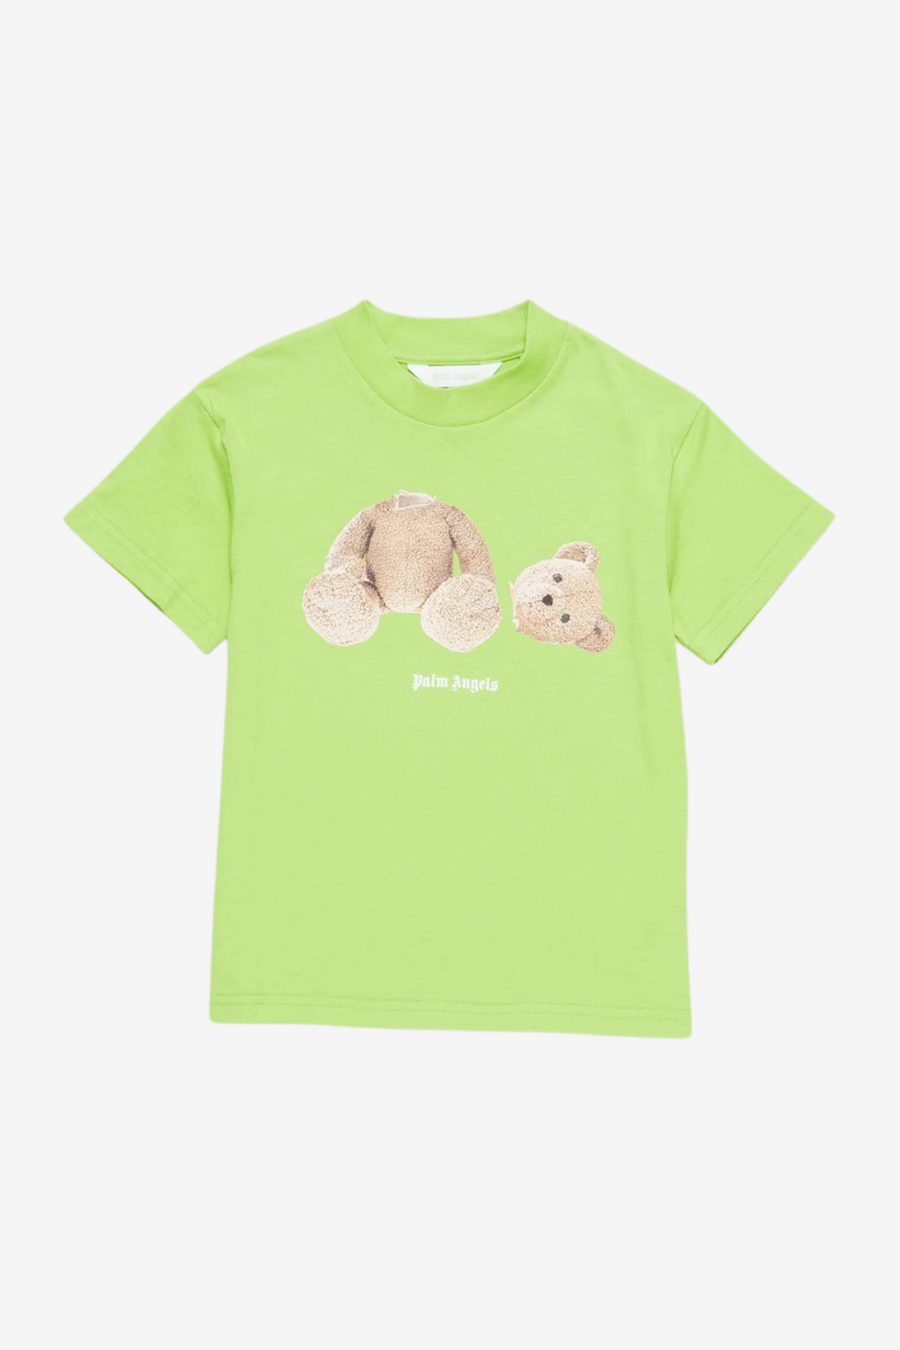 Lime Green T-Shirt with ripped Teddy